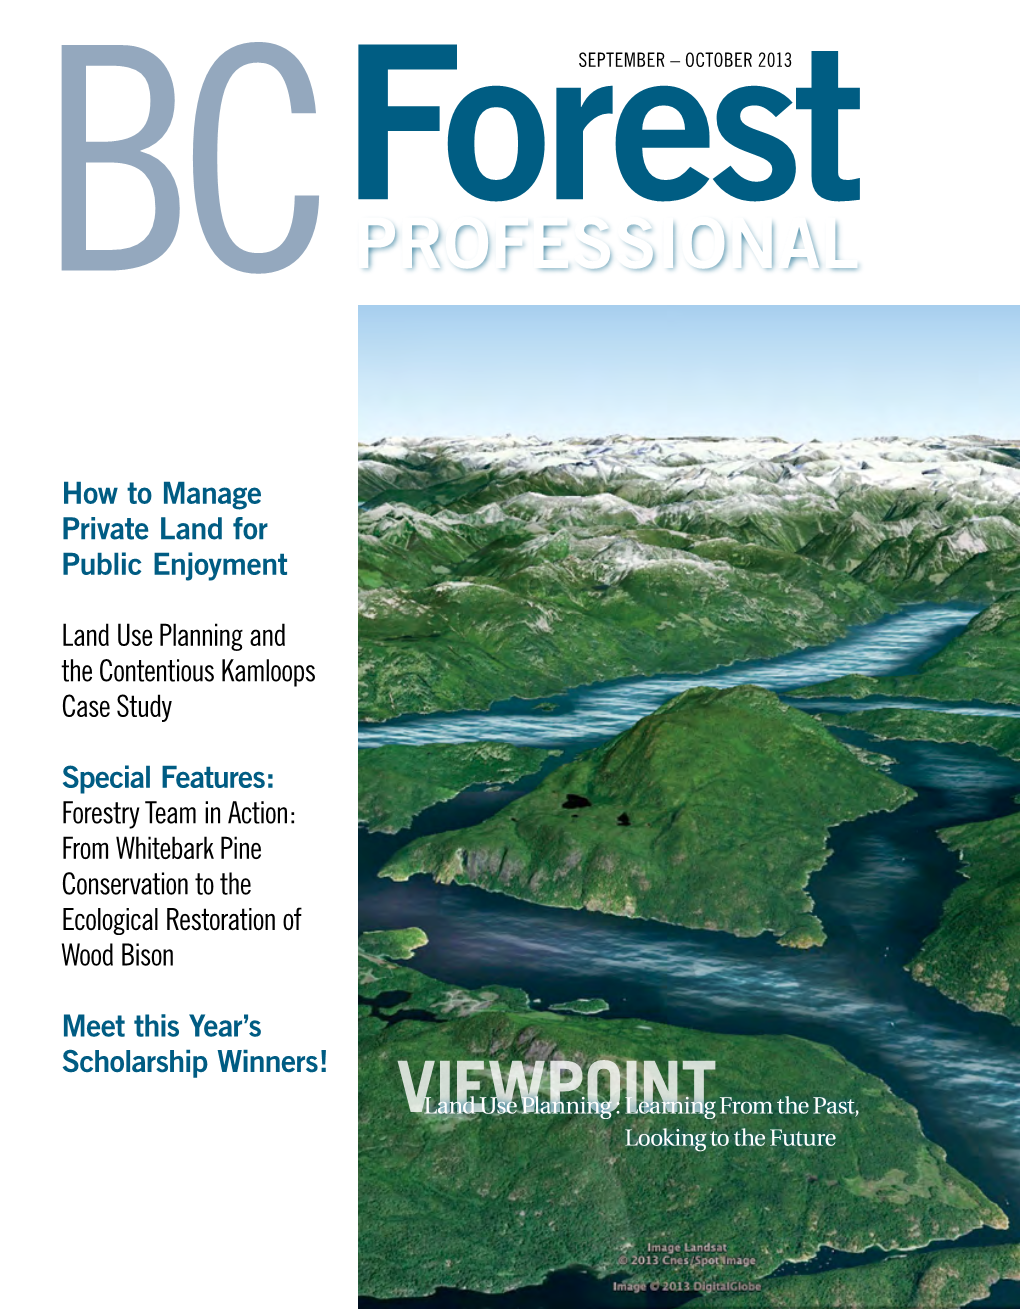 Viewpointland Use Planning : Learning from the Past, Looking to the Future